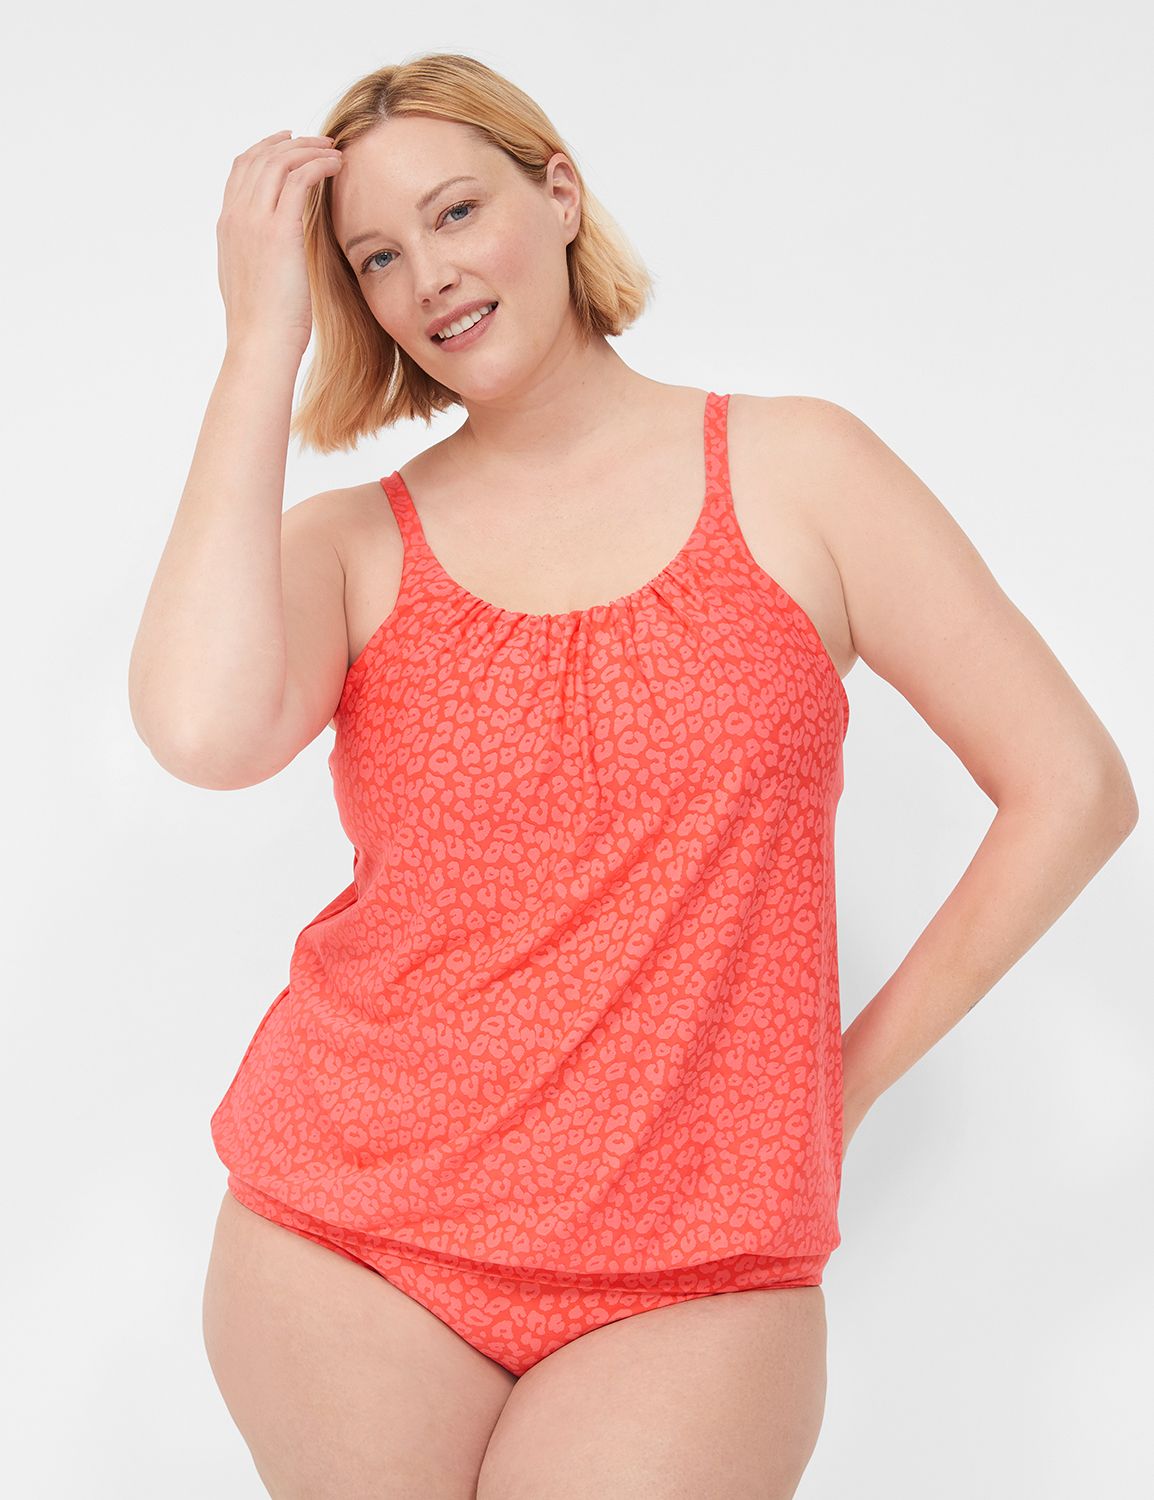 Swim by Cacique Red Swimsuit Top Size XL (40D) - 52% off